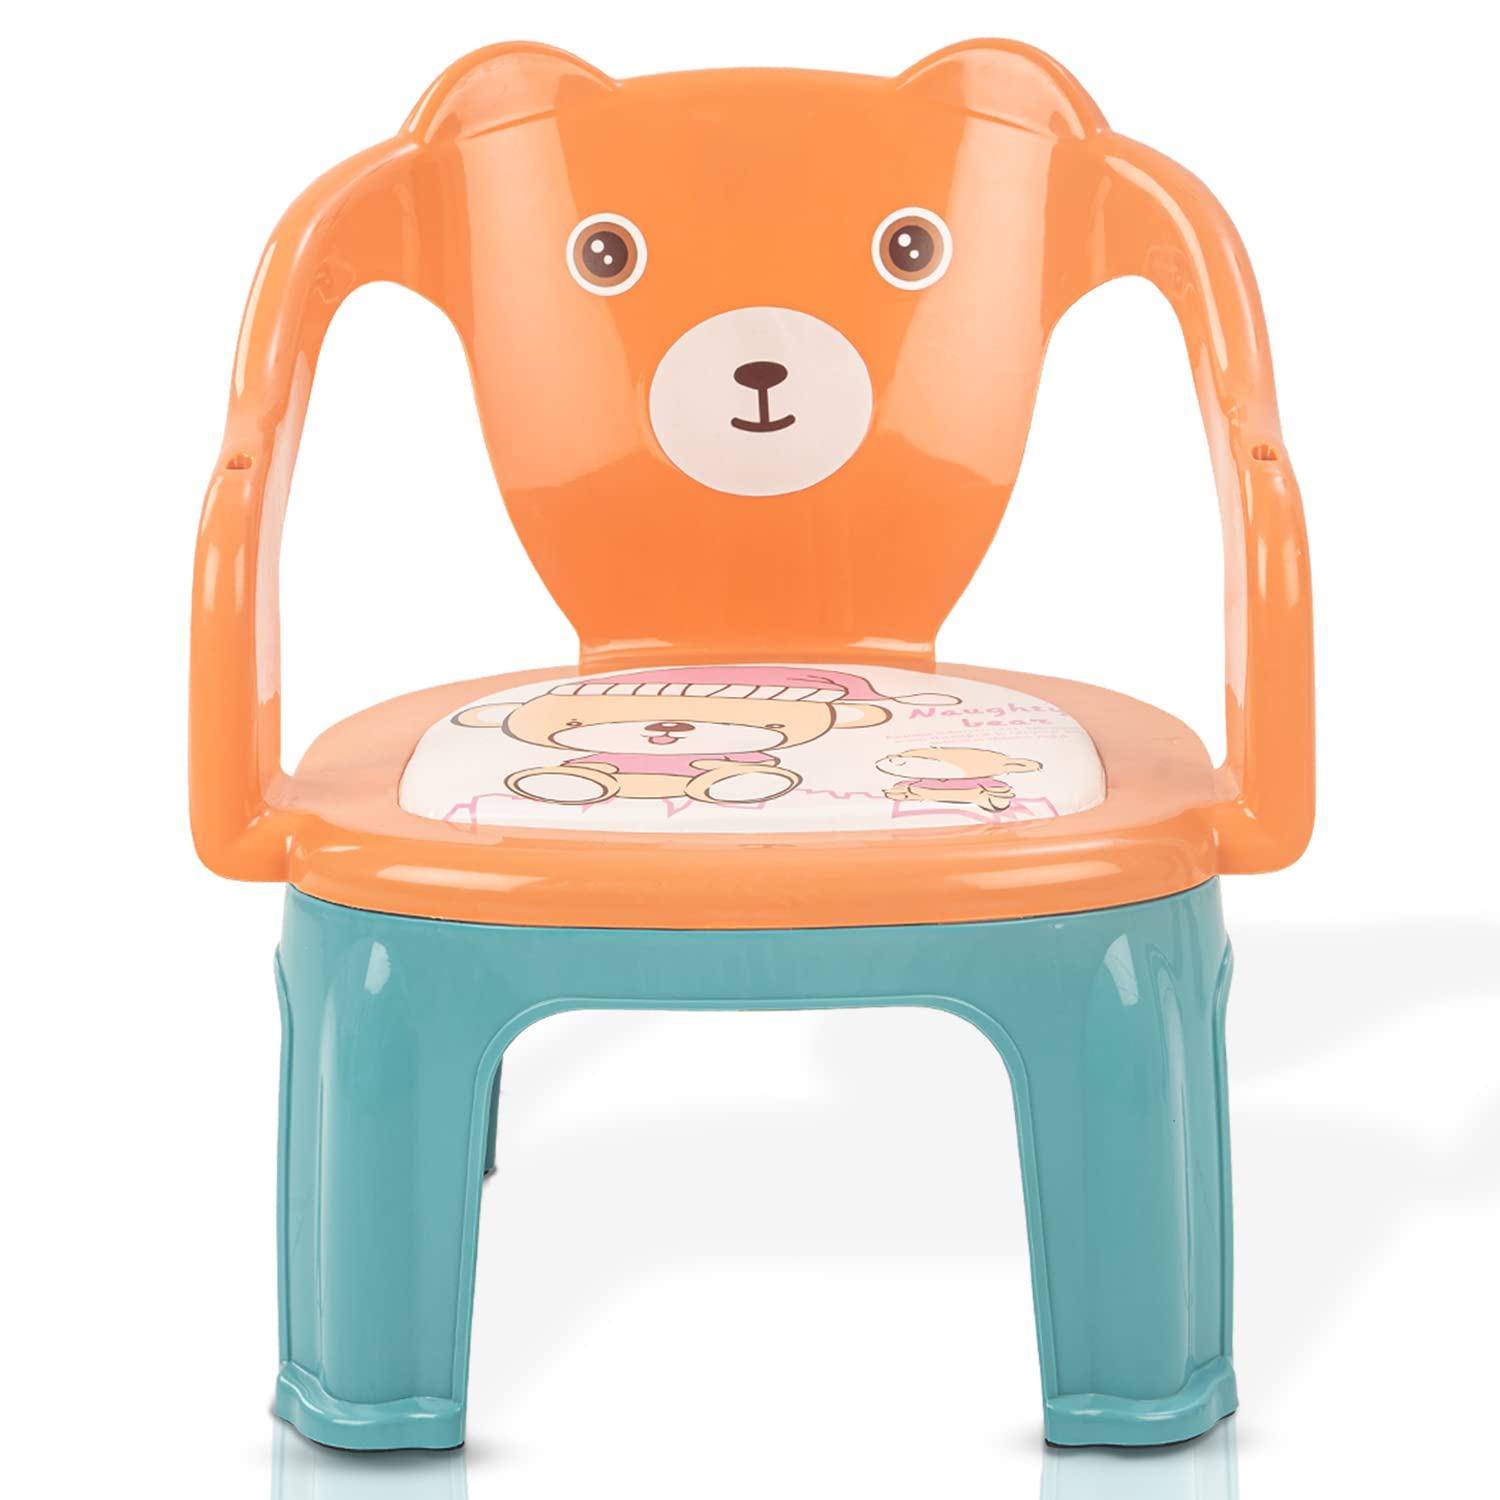 Baybee Plastic Baby Chair for Kids